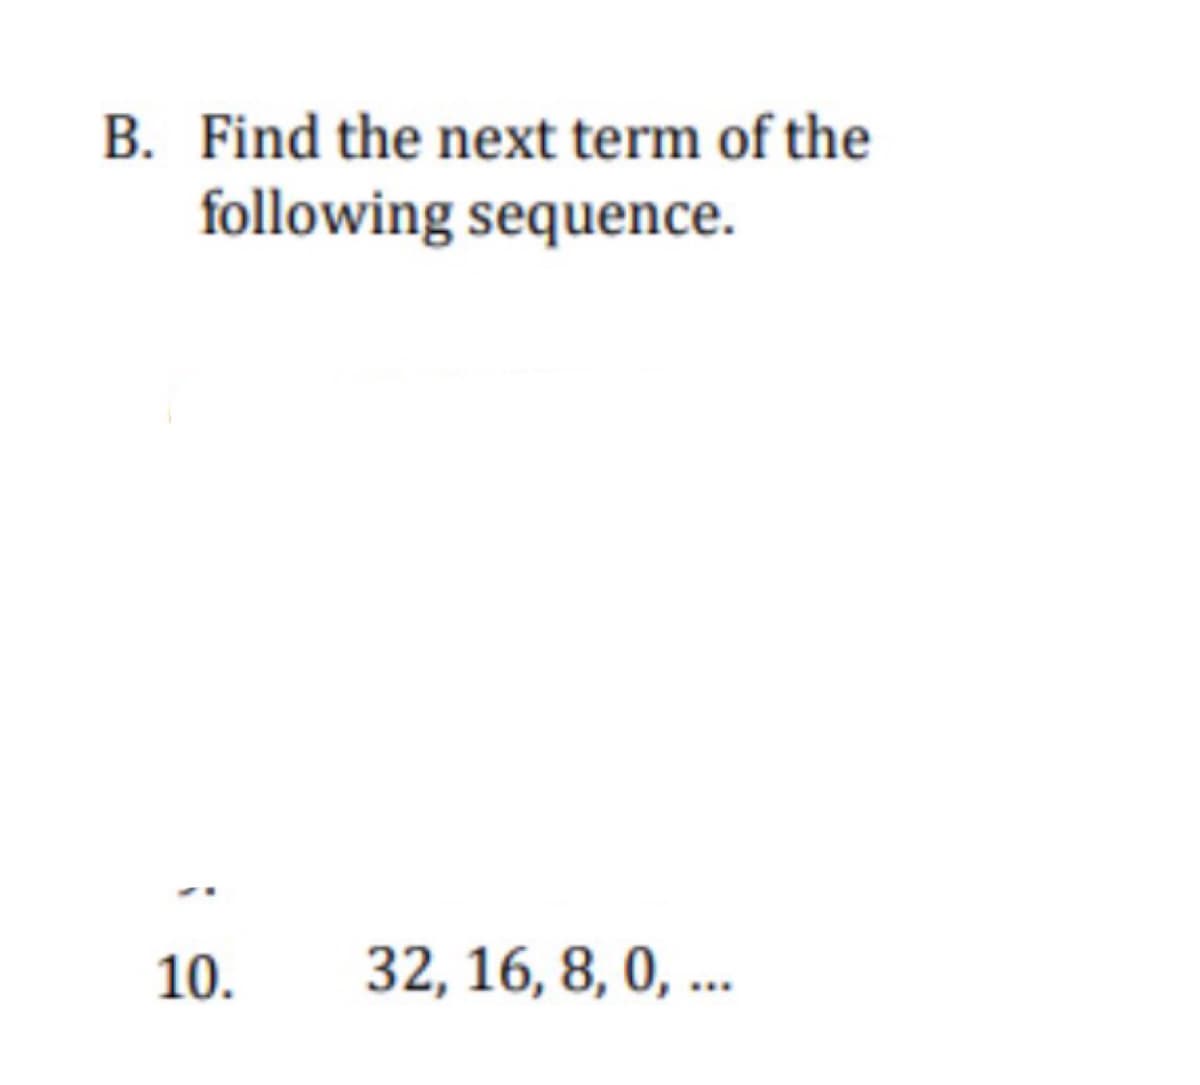 B. Find the next term of the
following sequence.
10.
32, 16, 8, 0, ..
